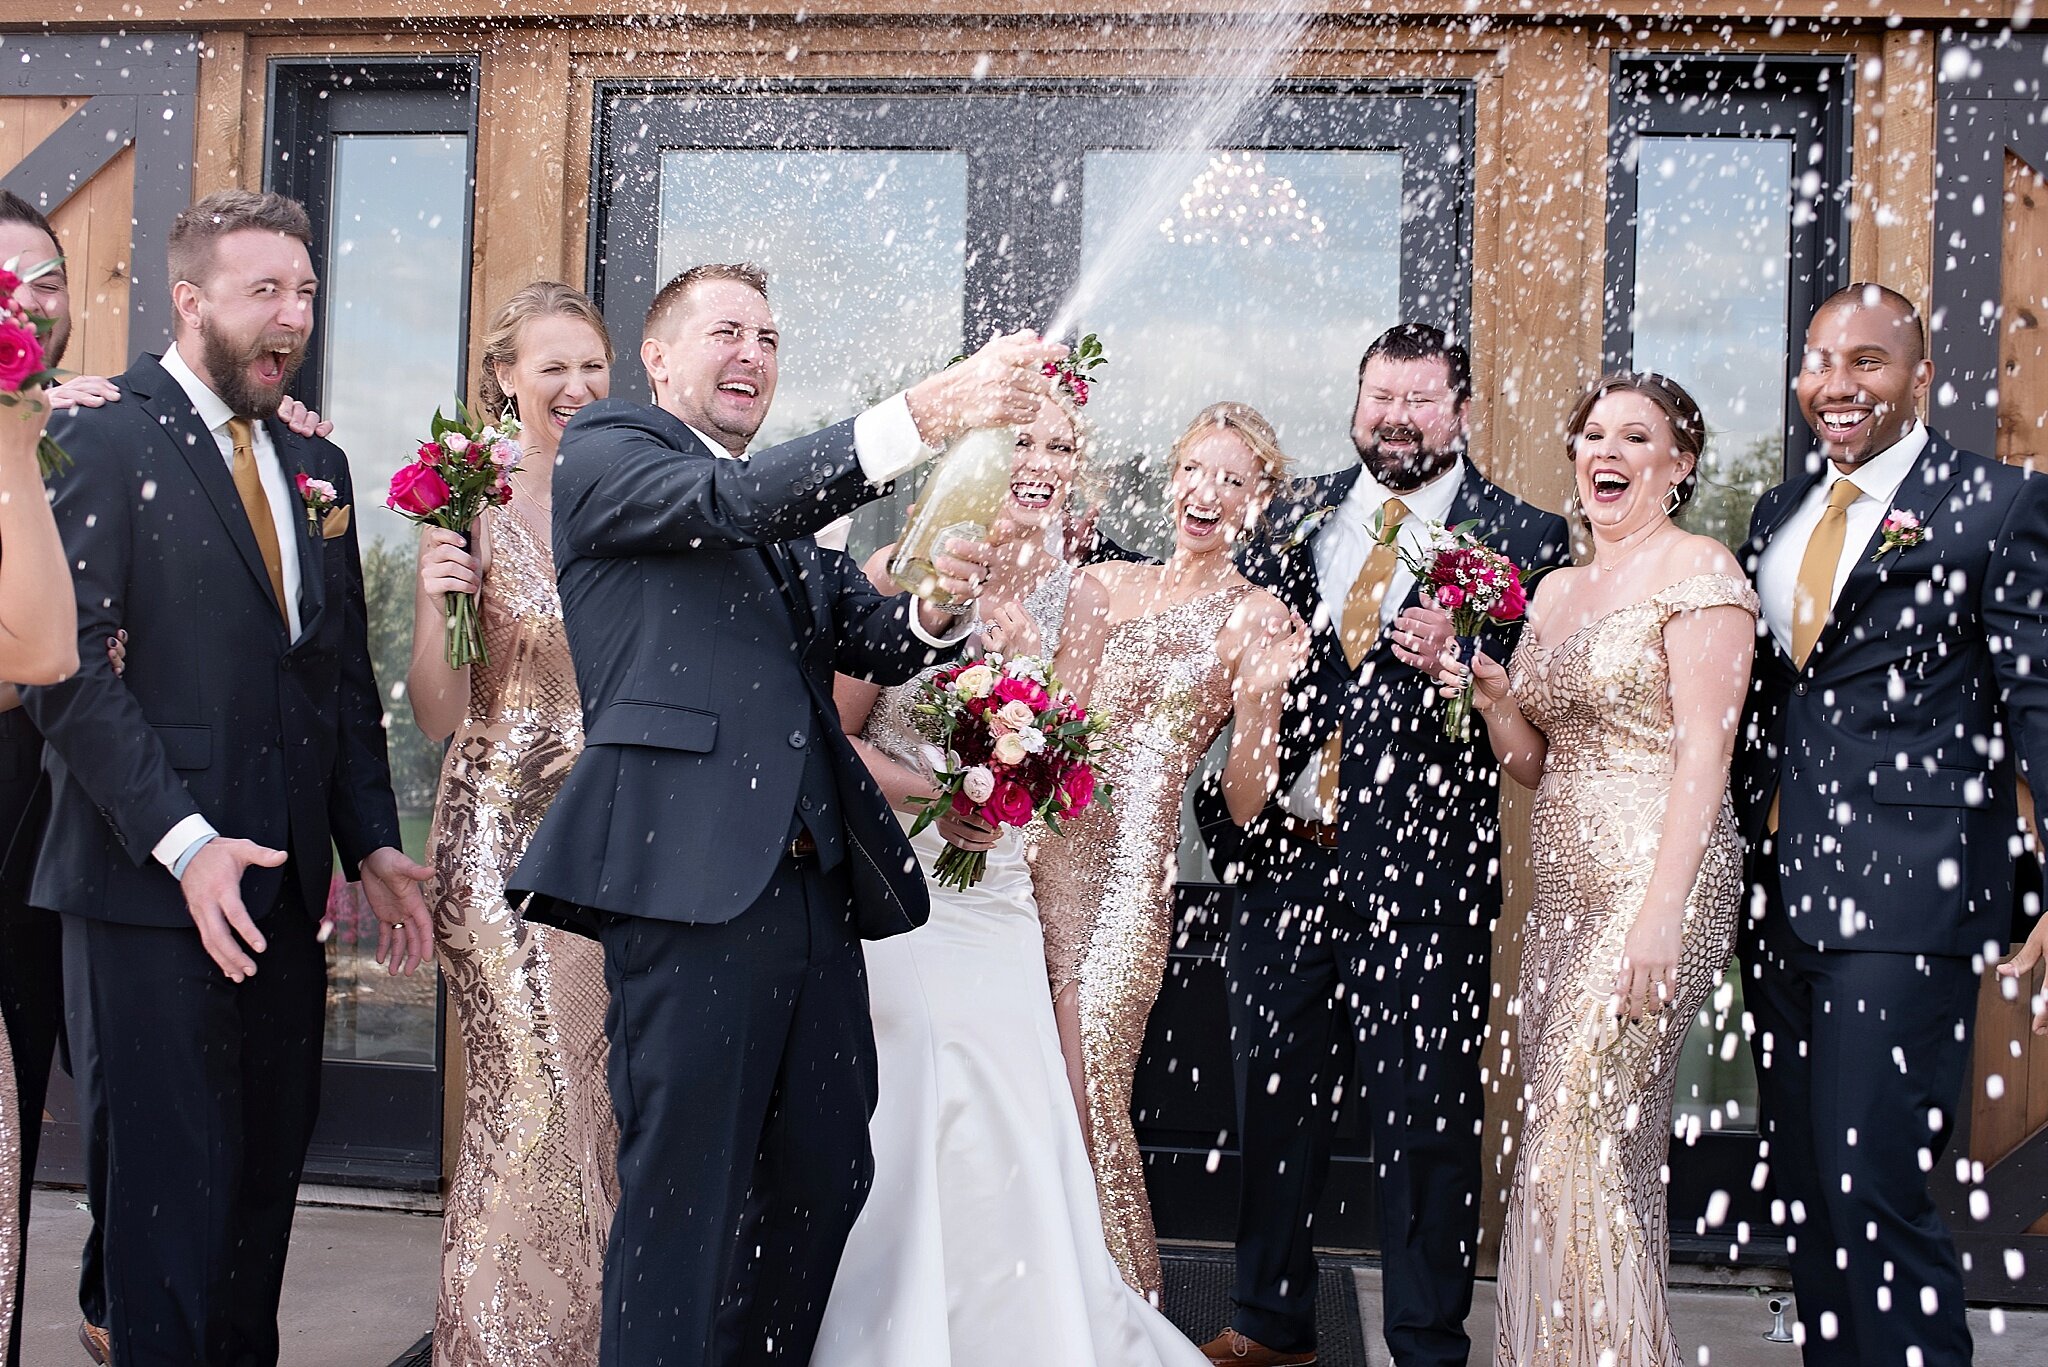 wedding party pops champagne to celebrate the bride and groom